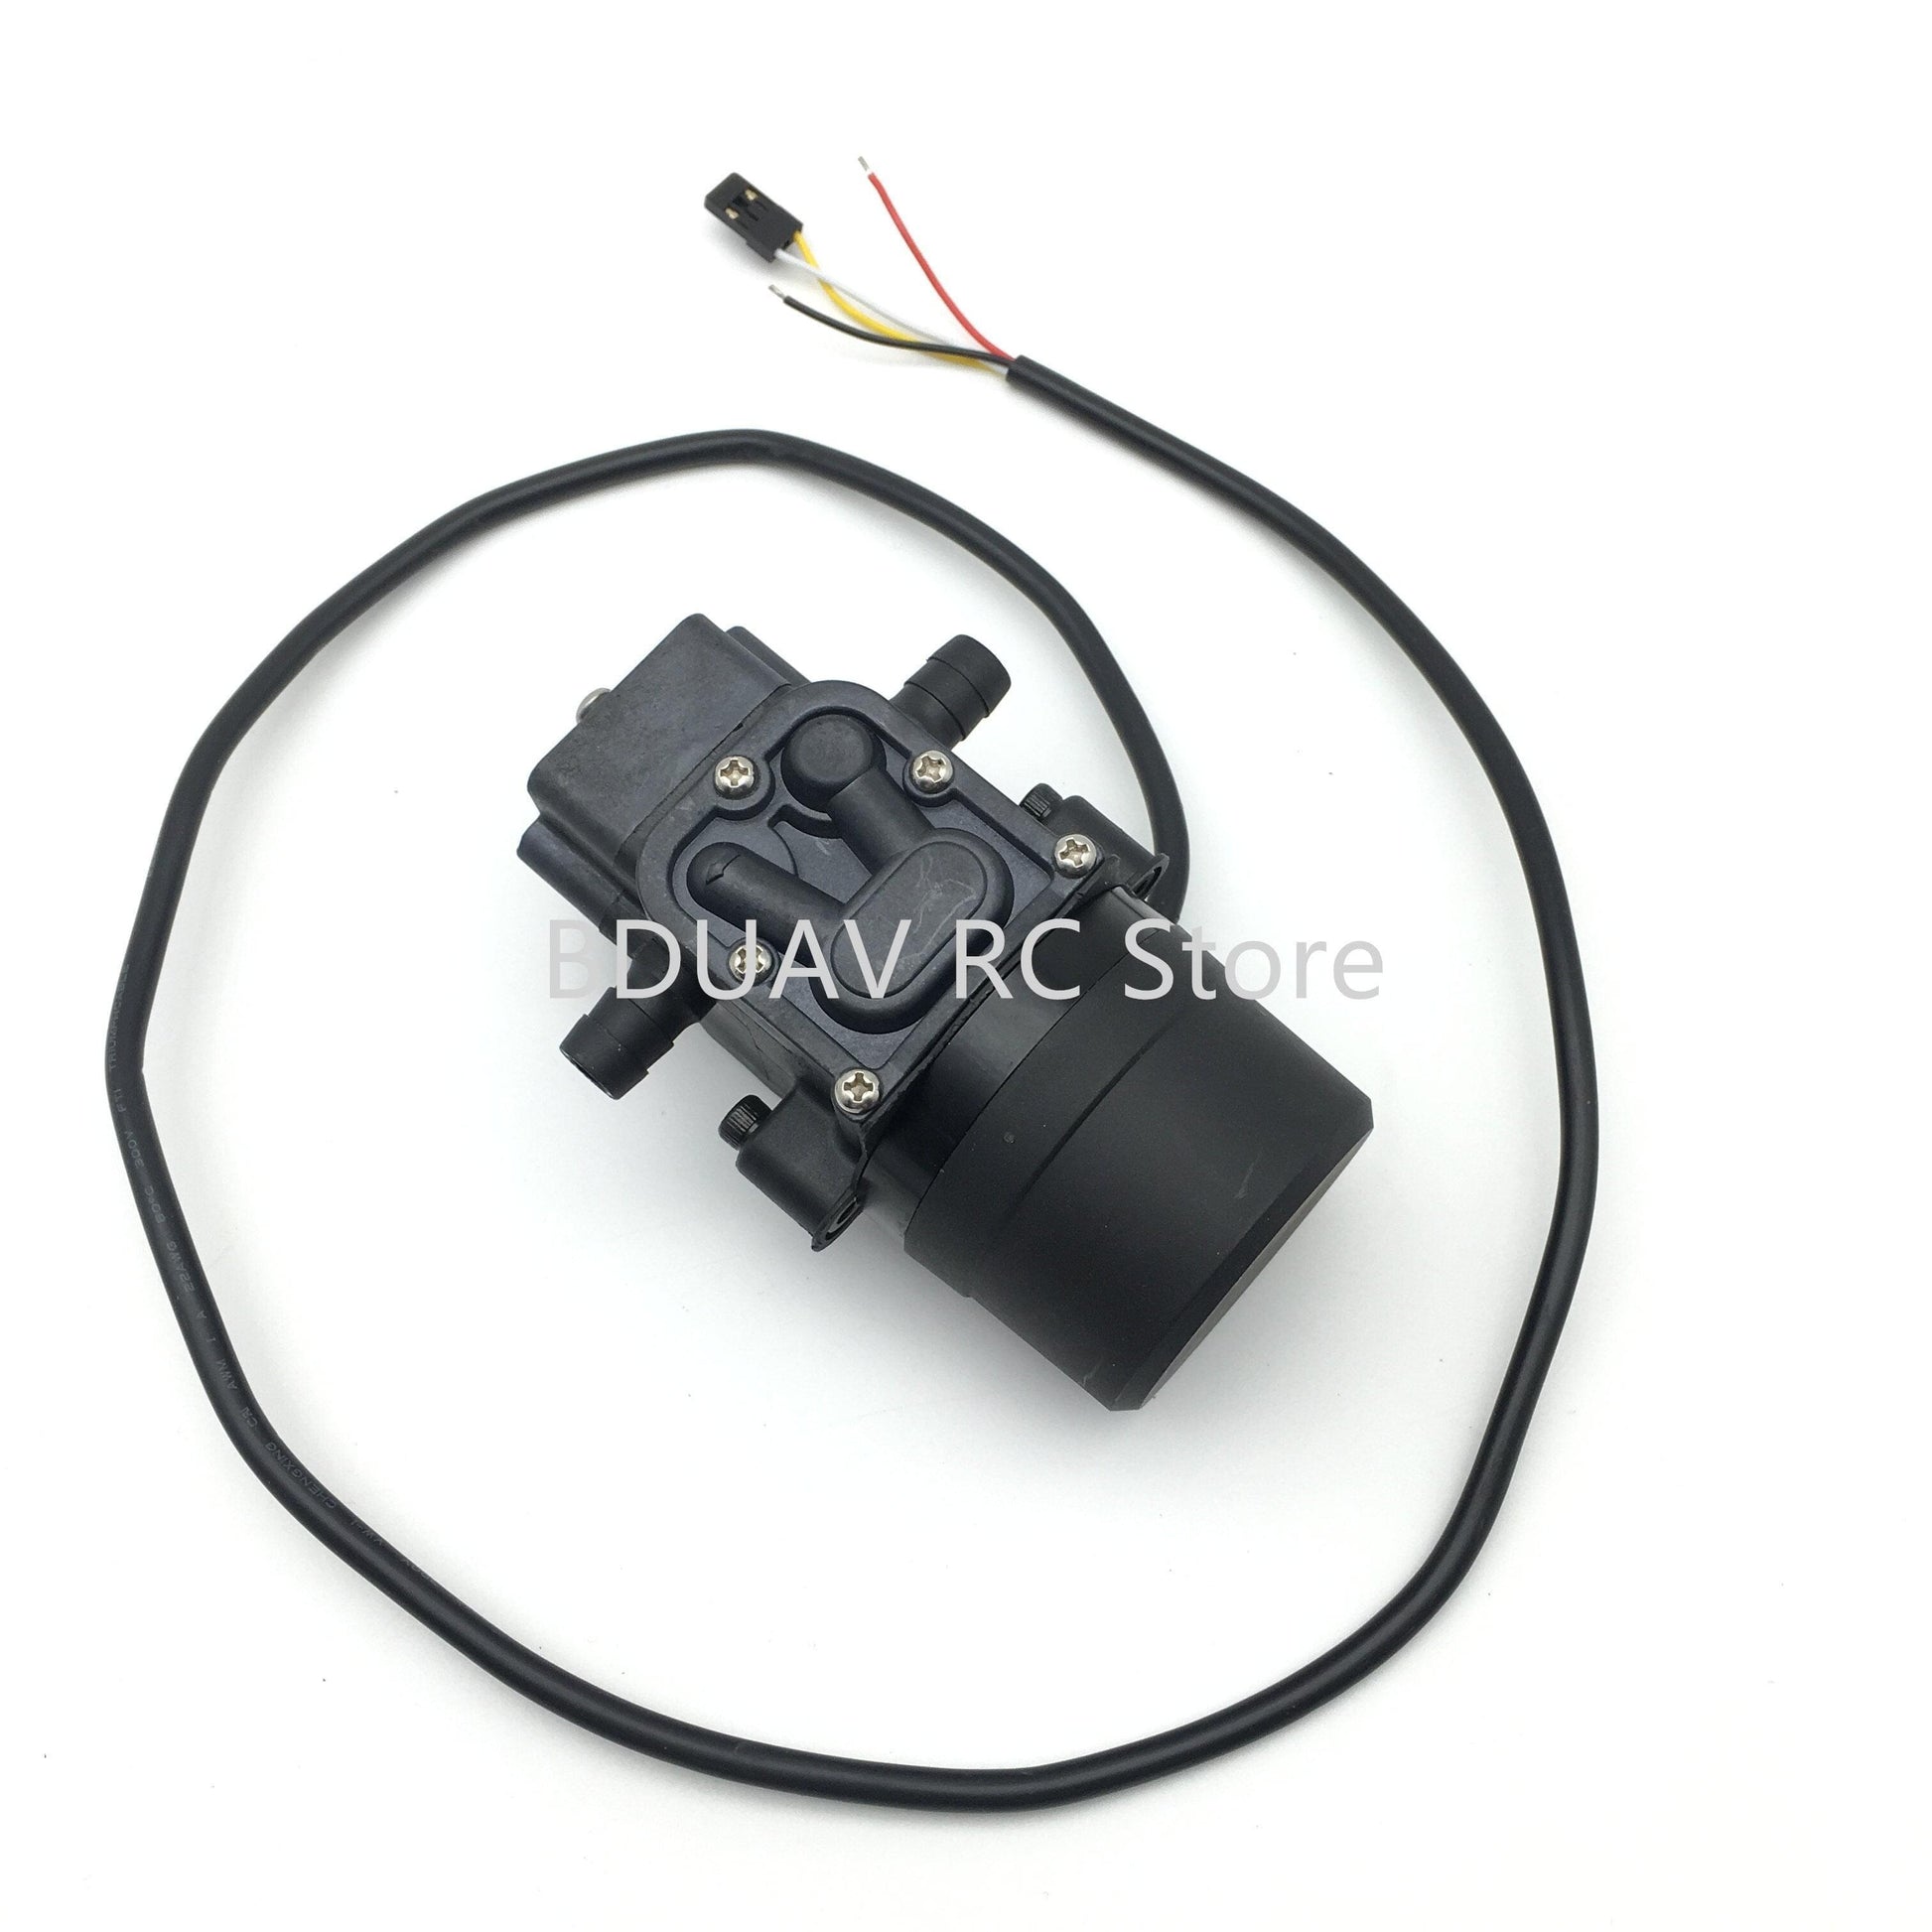 12S 14S DC44-56V mini brushless water pump built-in ESC low noise, long life for Agricultural spraying drone - RCDrone